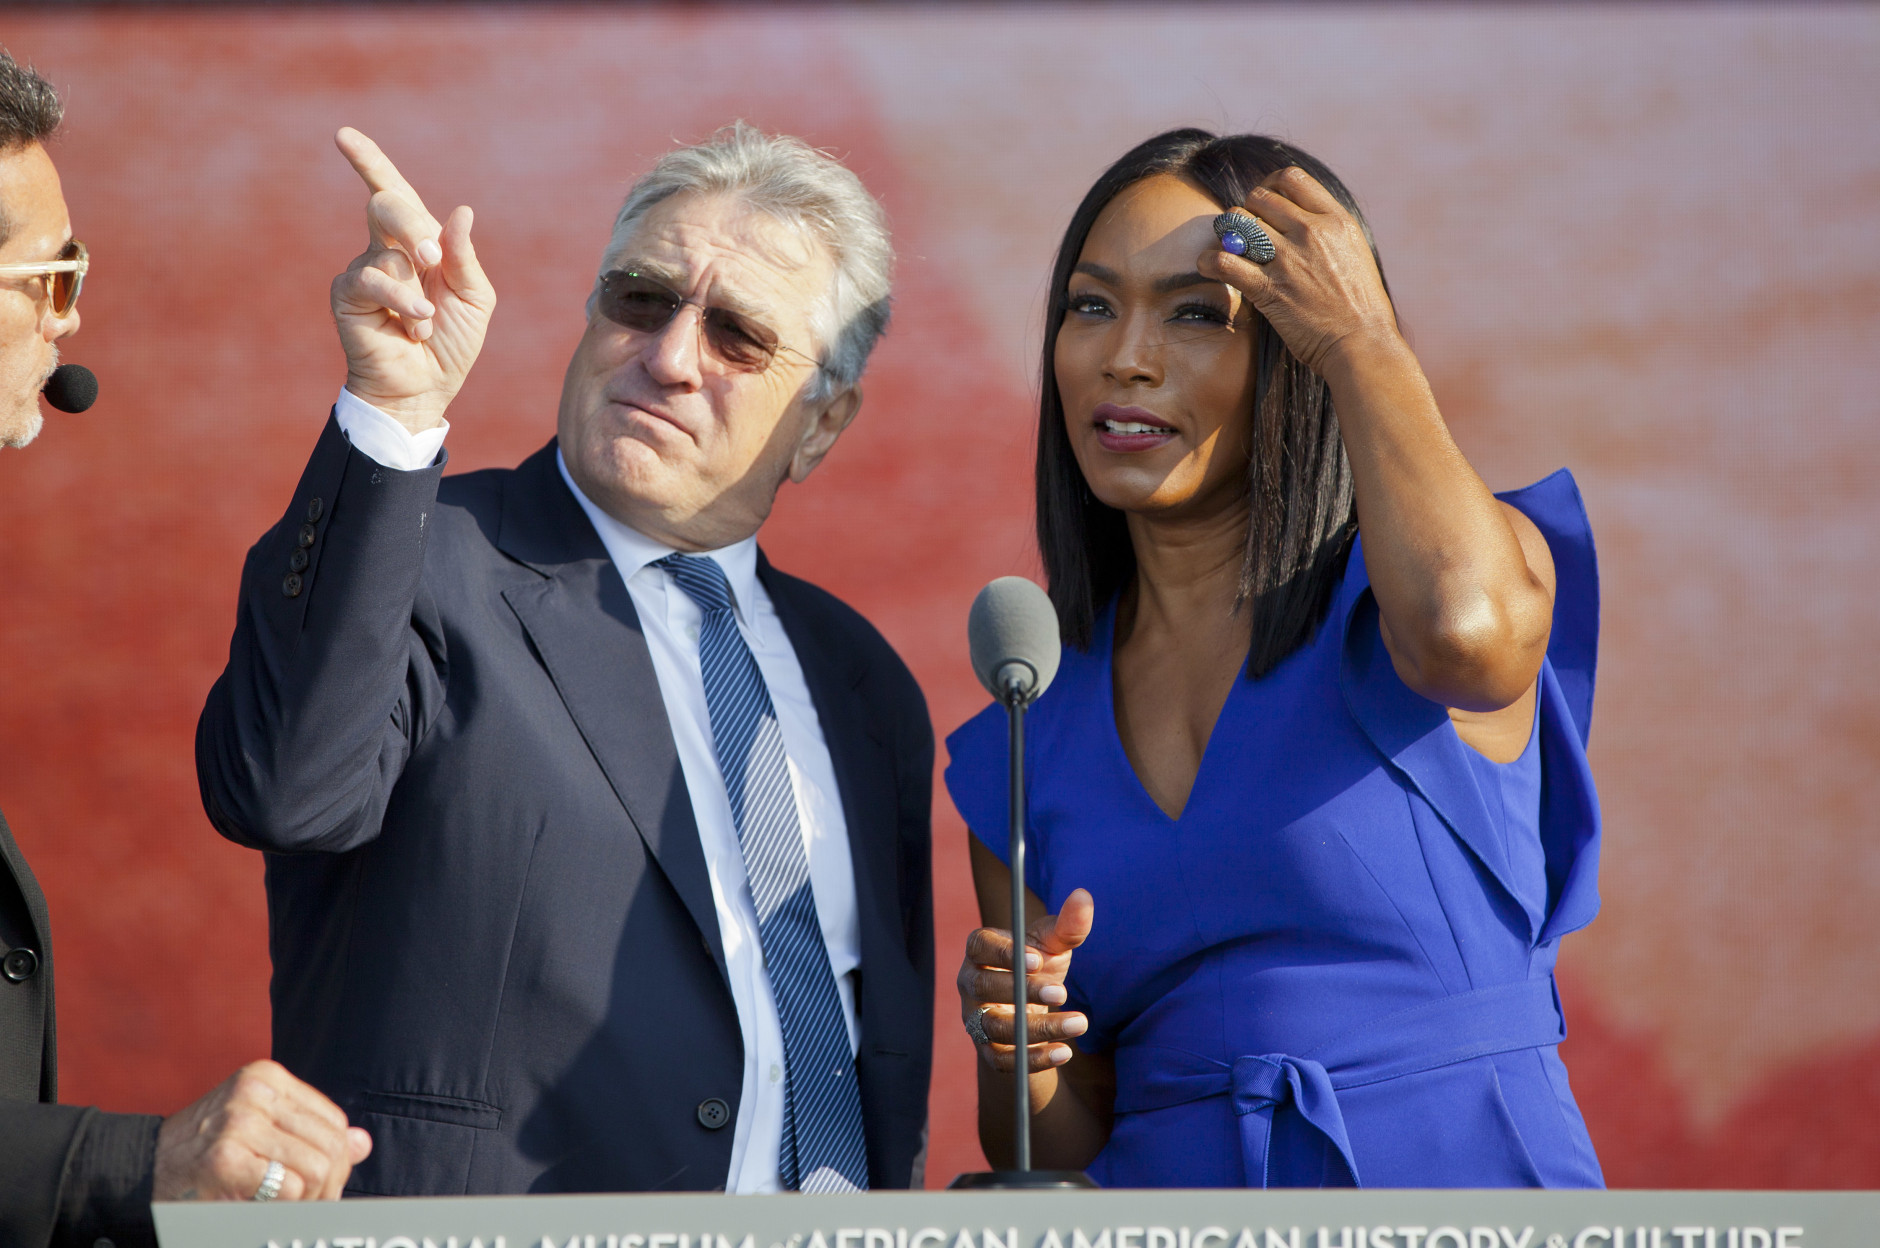 Actors Robert De Niro, left, and Angela Bassett, stand on stage during a sounds check before the dedication ceremony of the Smithsonian Museum of African American History and Culture on the National Mall in Washington, Saturday, Sept. 24, 2016. (AP Photo/Pablo Martinez Monsivais)